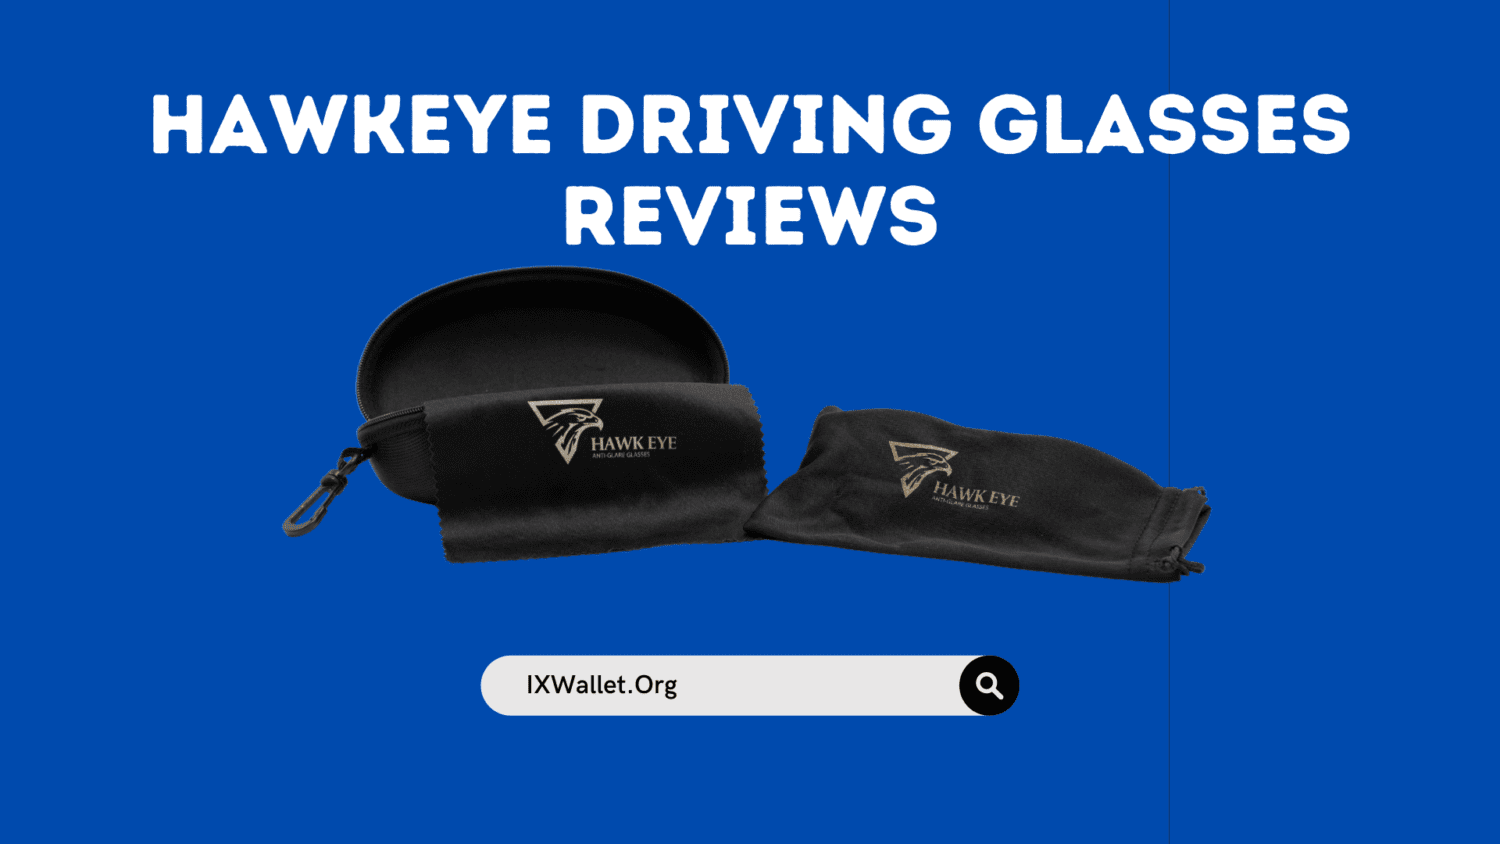 Hawkeye Driving Glasses Reviews: Does It Really Work?